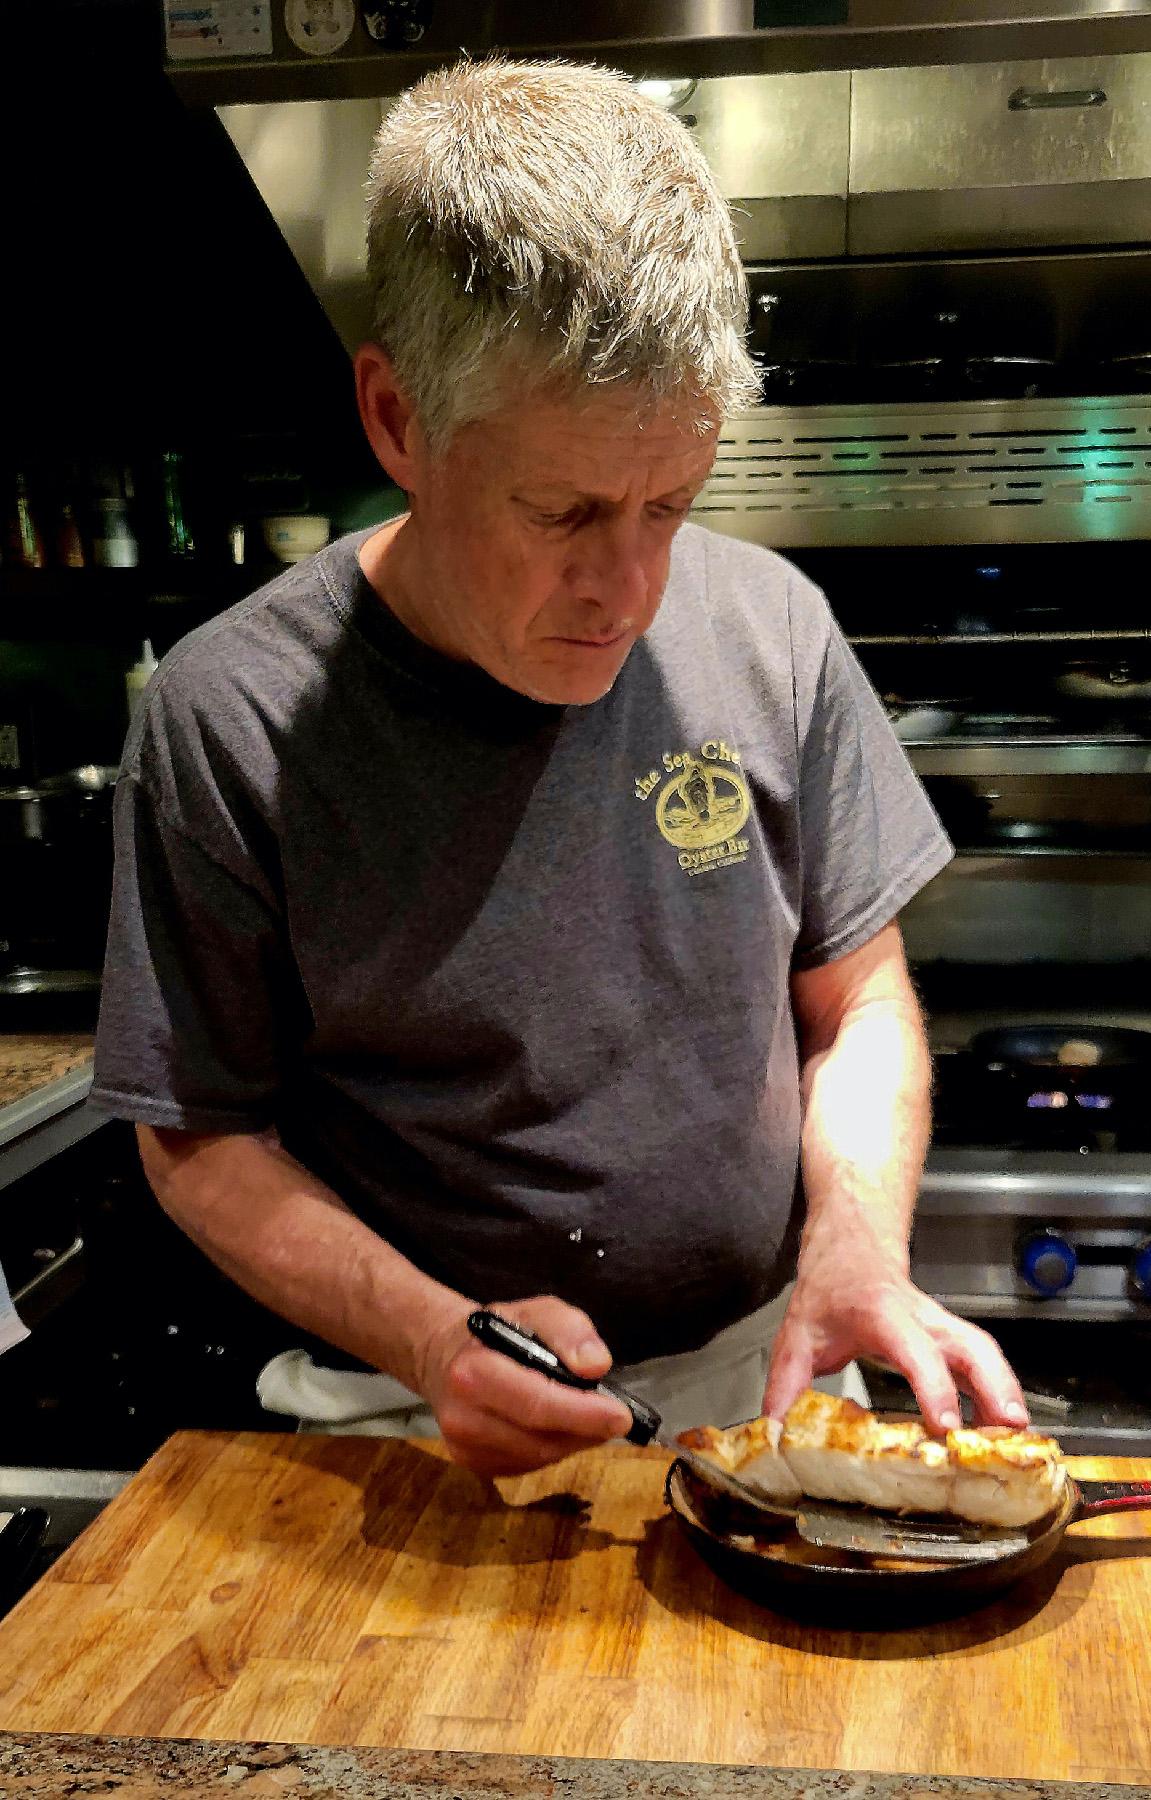 Chef Steven Kniffen serves up a fresh seafood dinner at the Sea Chest Oyster Bar in Cambria, Calif. (Courtesy of Jim Farber)